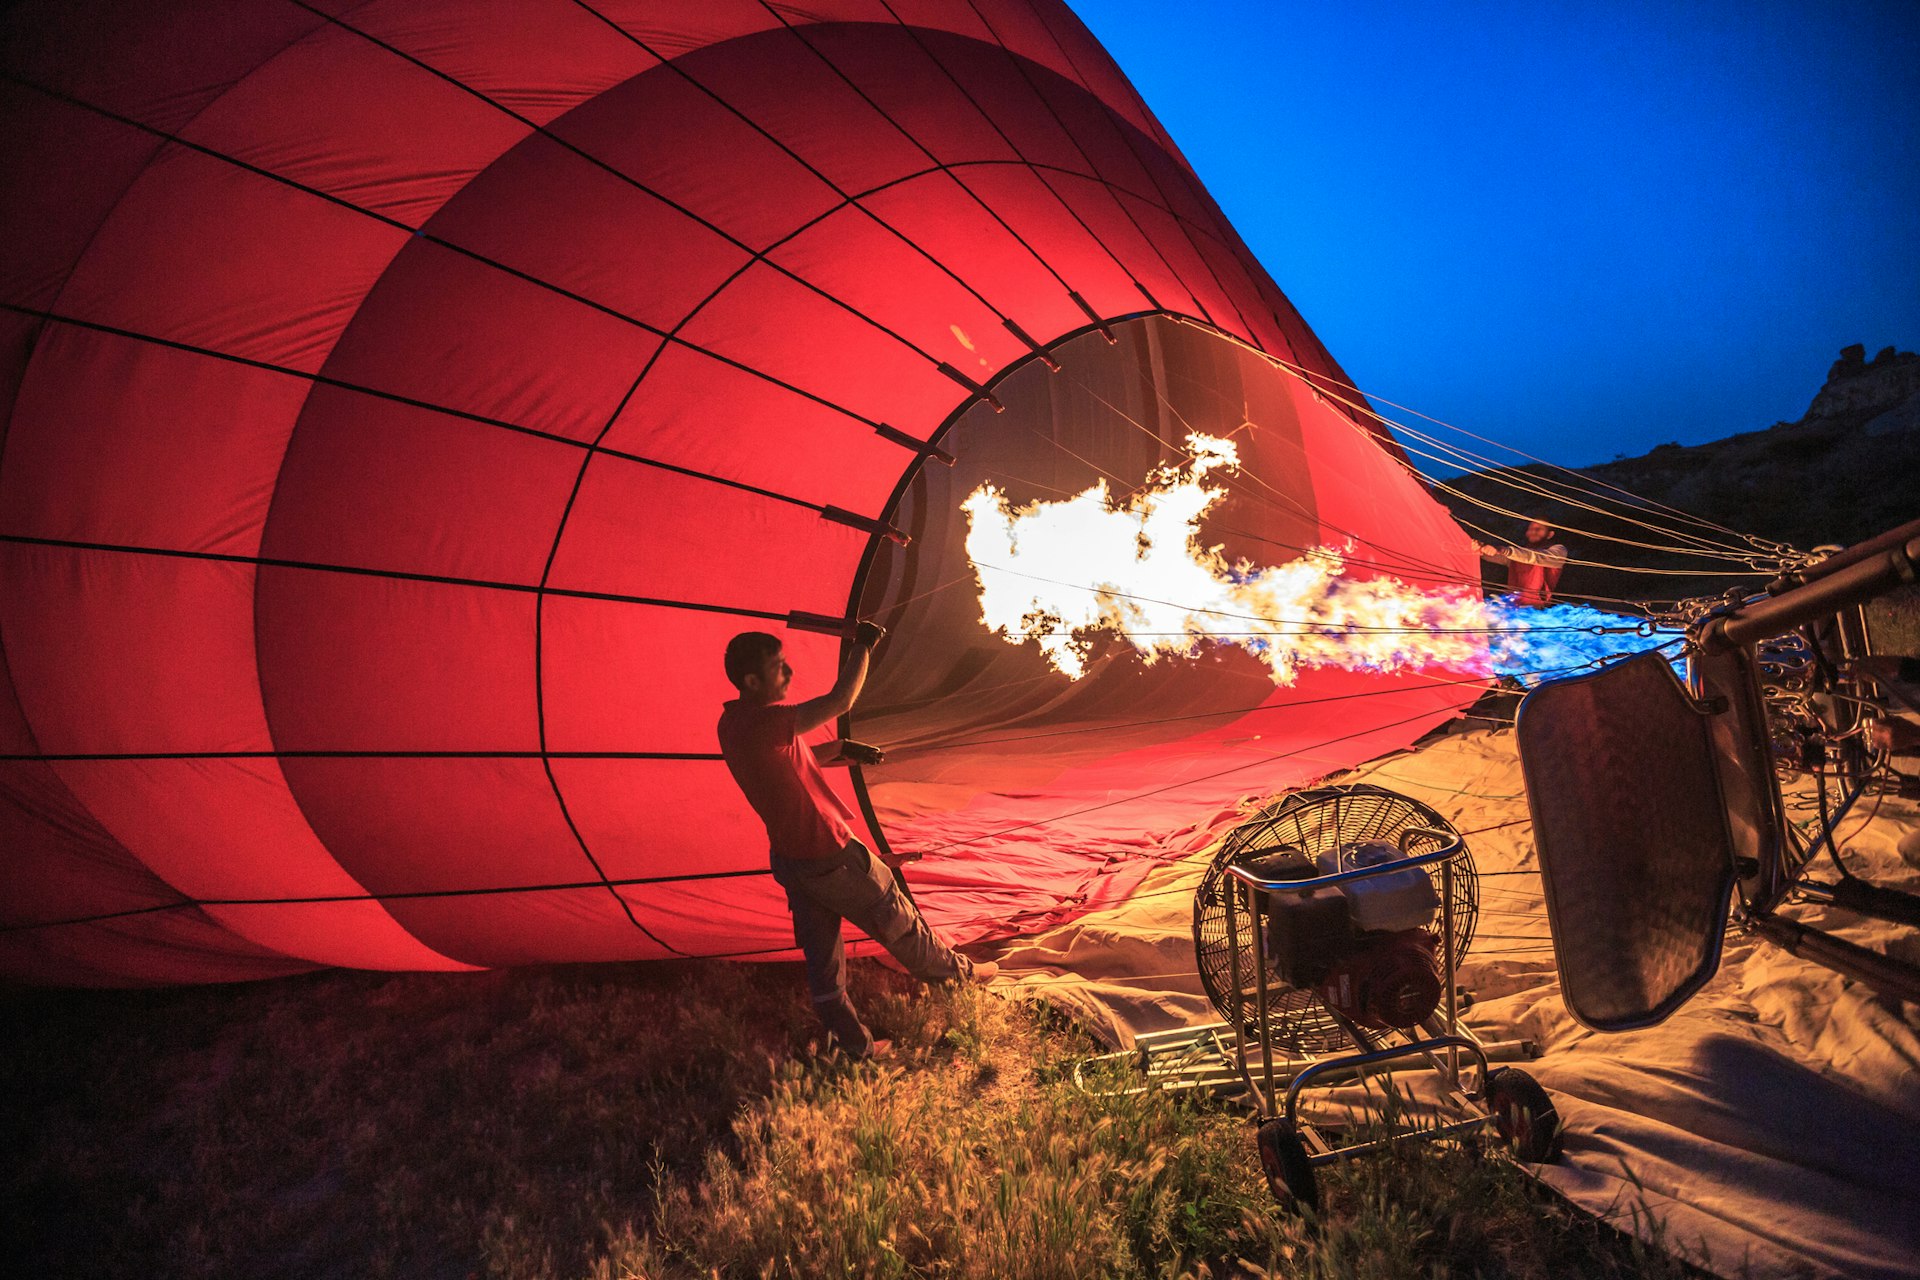 Turkish men inflating a hot air balloon, in preparation for take-off for a dawn flight, at GÃ¶reme, the famous town of fairy chimney and pigeon houses, a UNESCO world heritage site situated in Nevsehir Province, in the Cappadocia Region